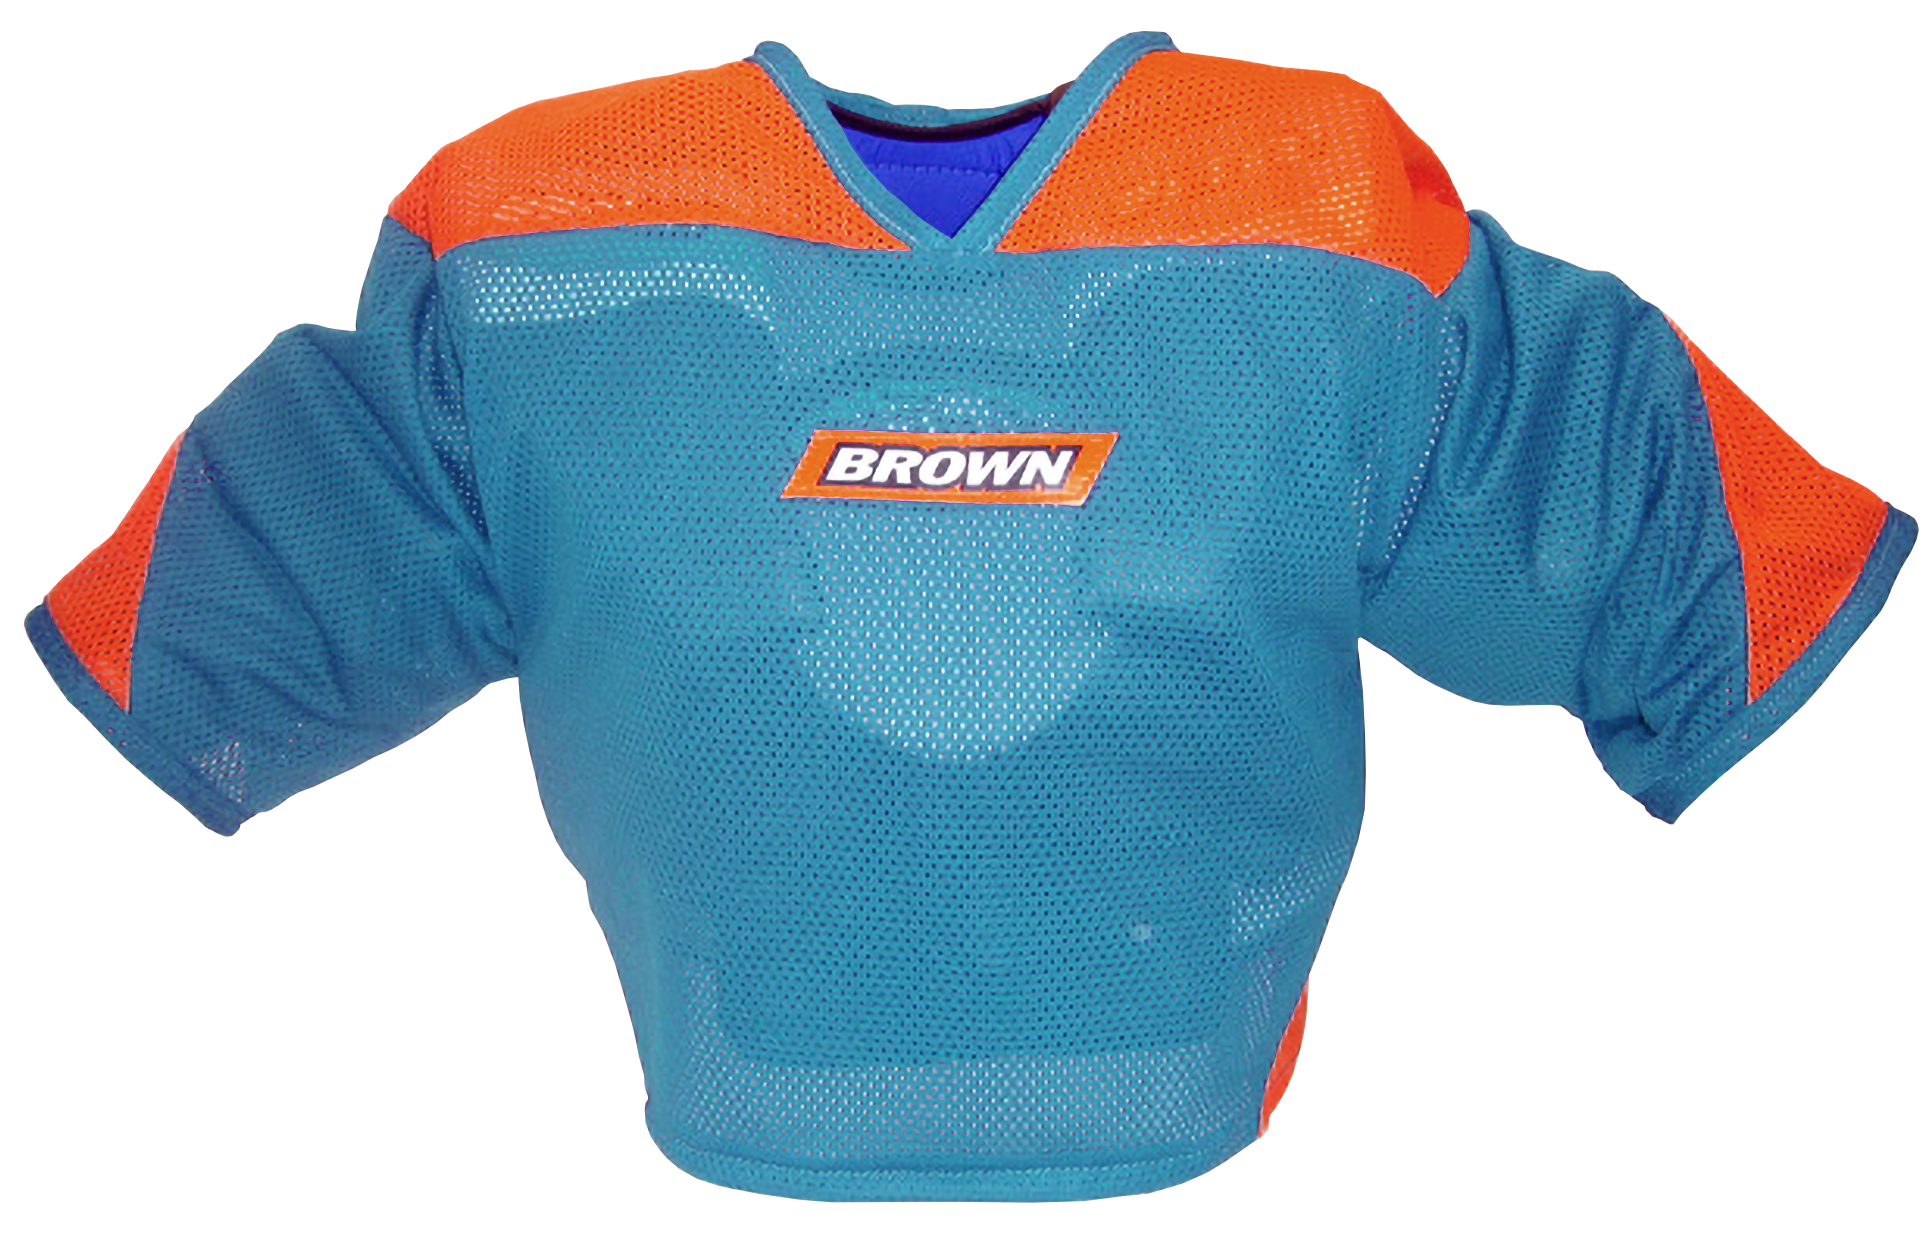 Teal and orange jersey